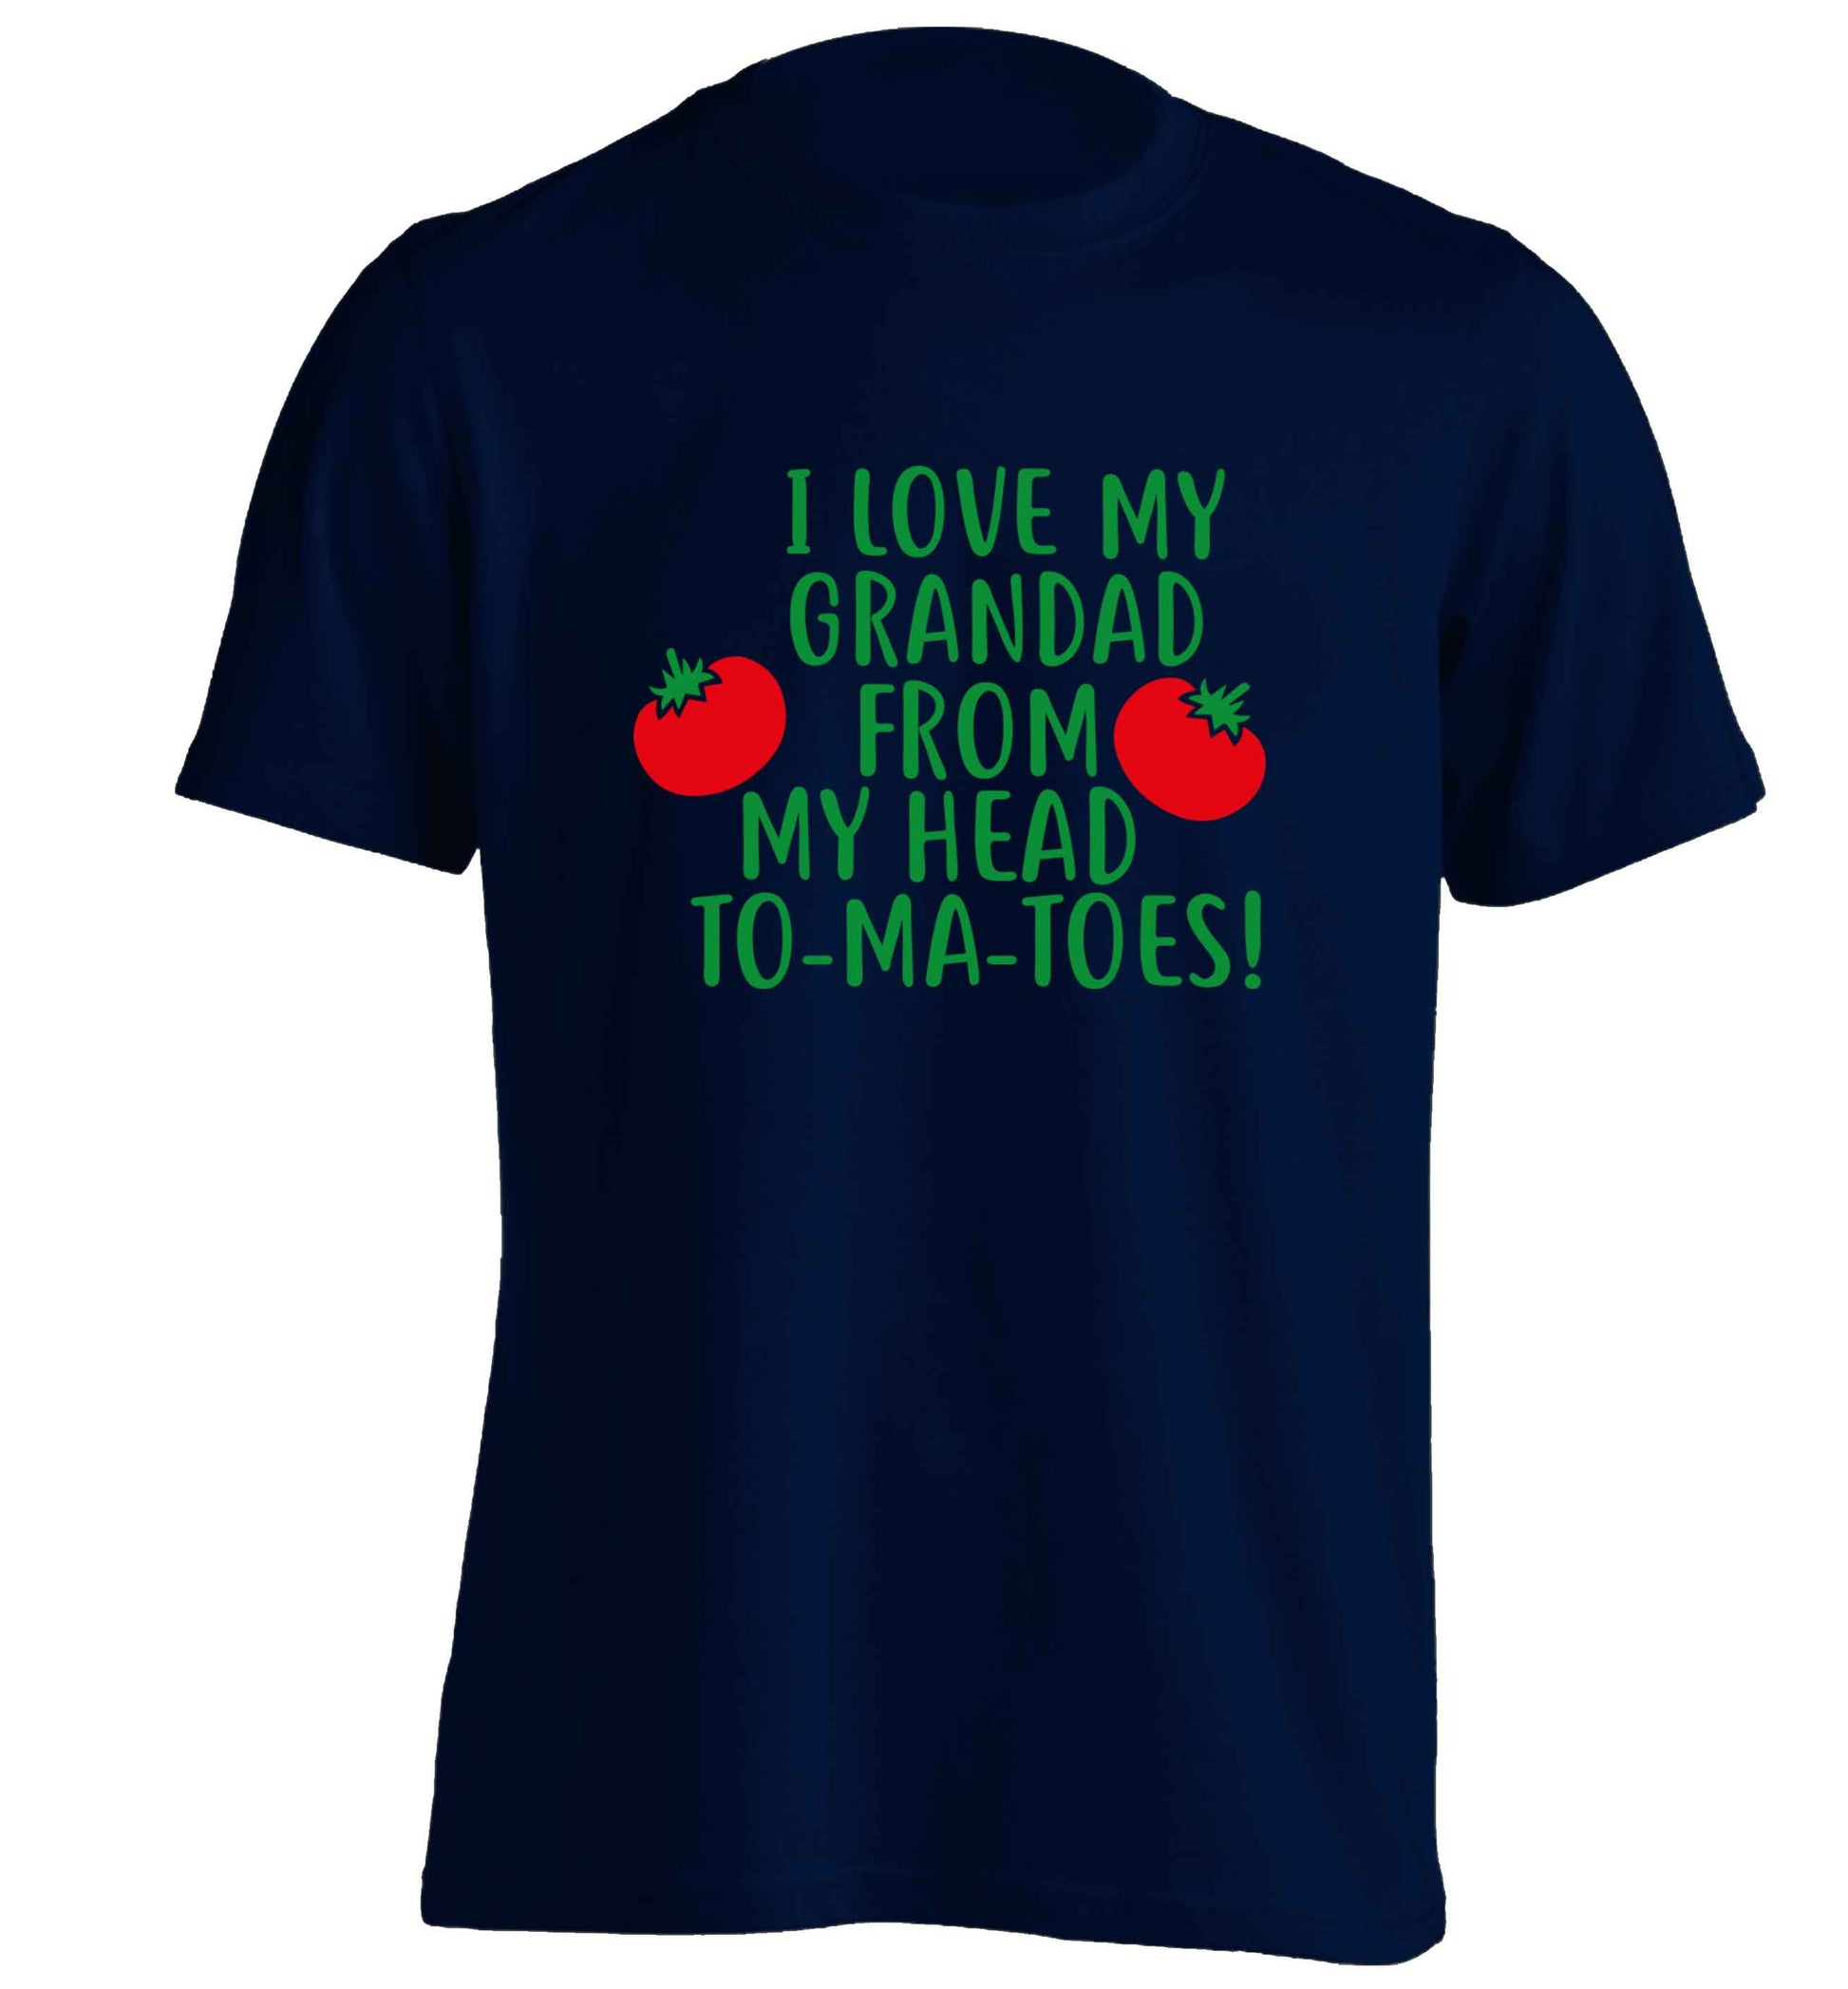 I love my grandad from my head To-Ma-Toes adults unisex navy Tshirt 2XL